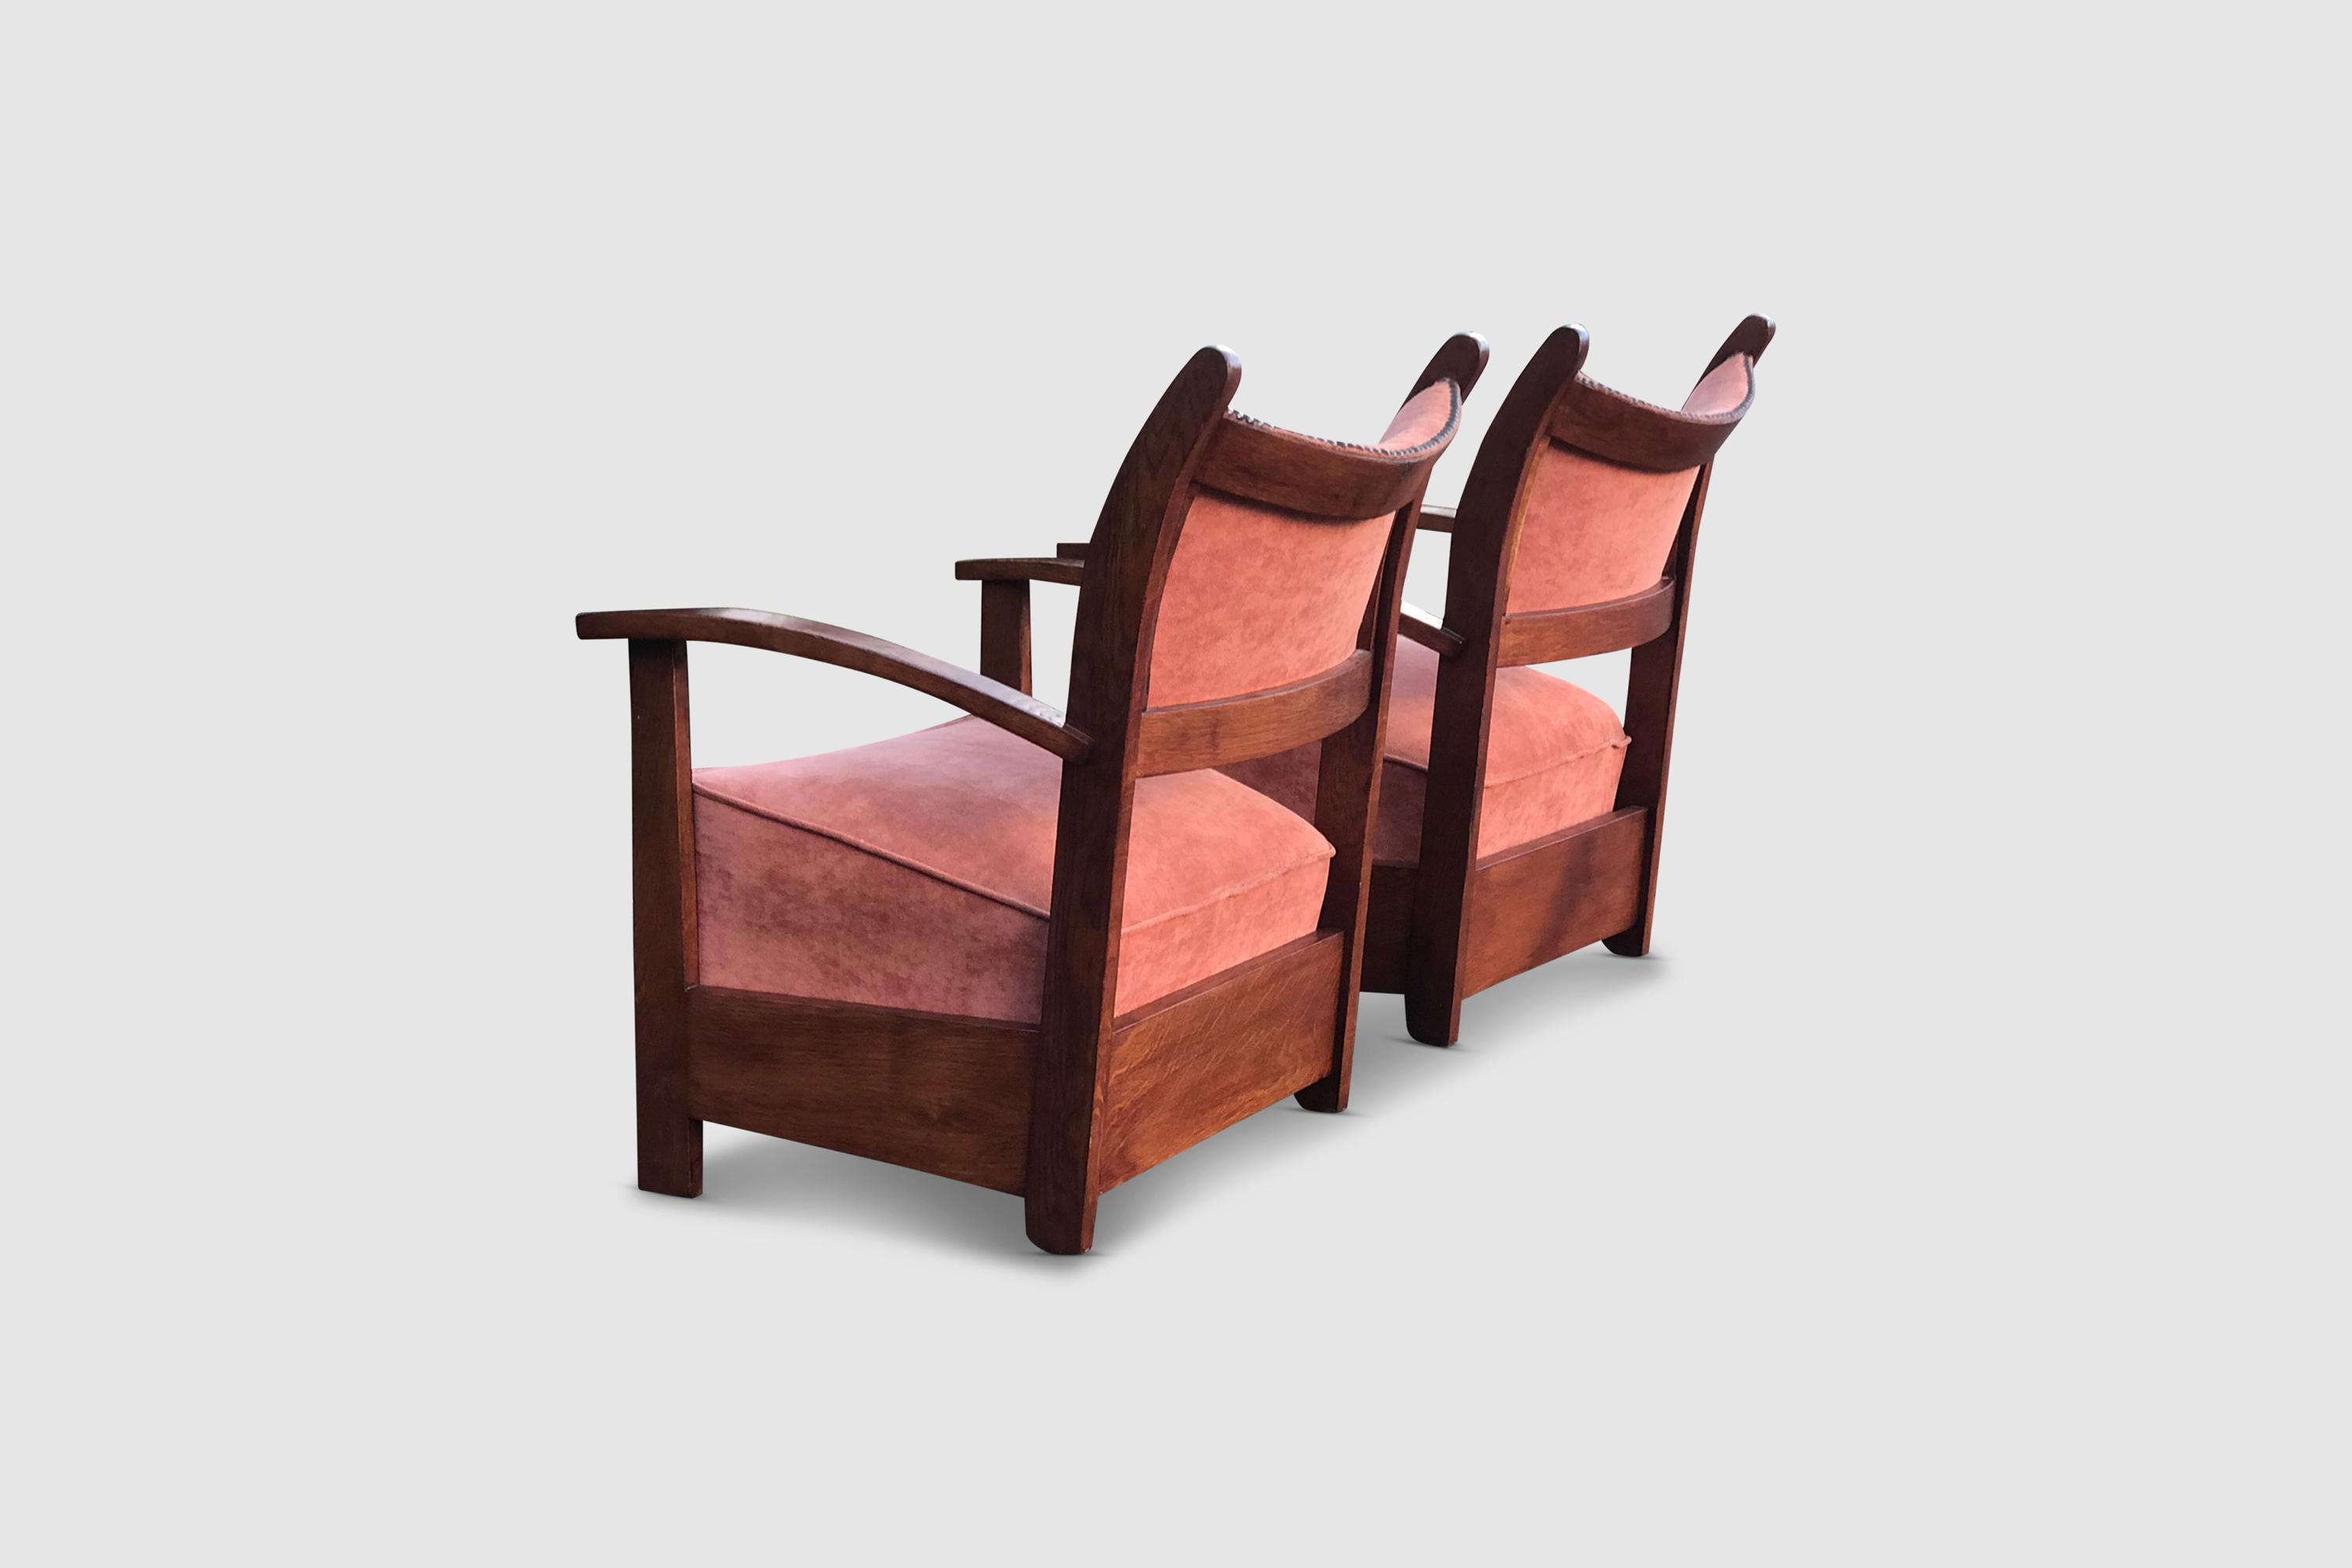 Low Oak and Tweed Armchairs Amsterdamse School 1930s, Set of 2 In Good Condition For Sale In Stavenisse, NL